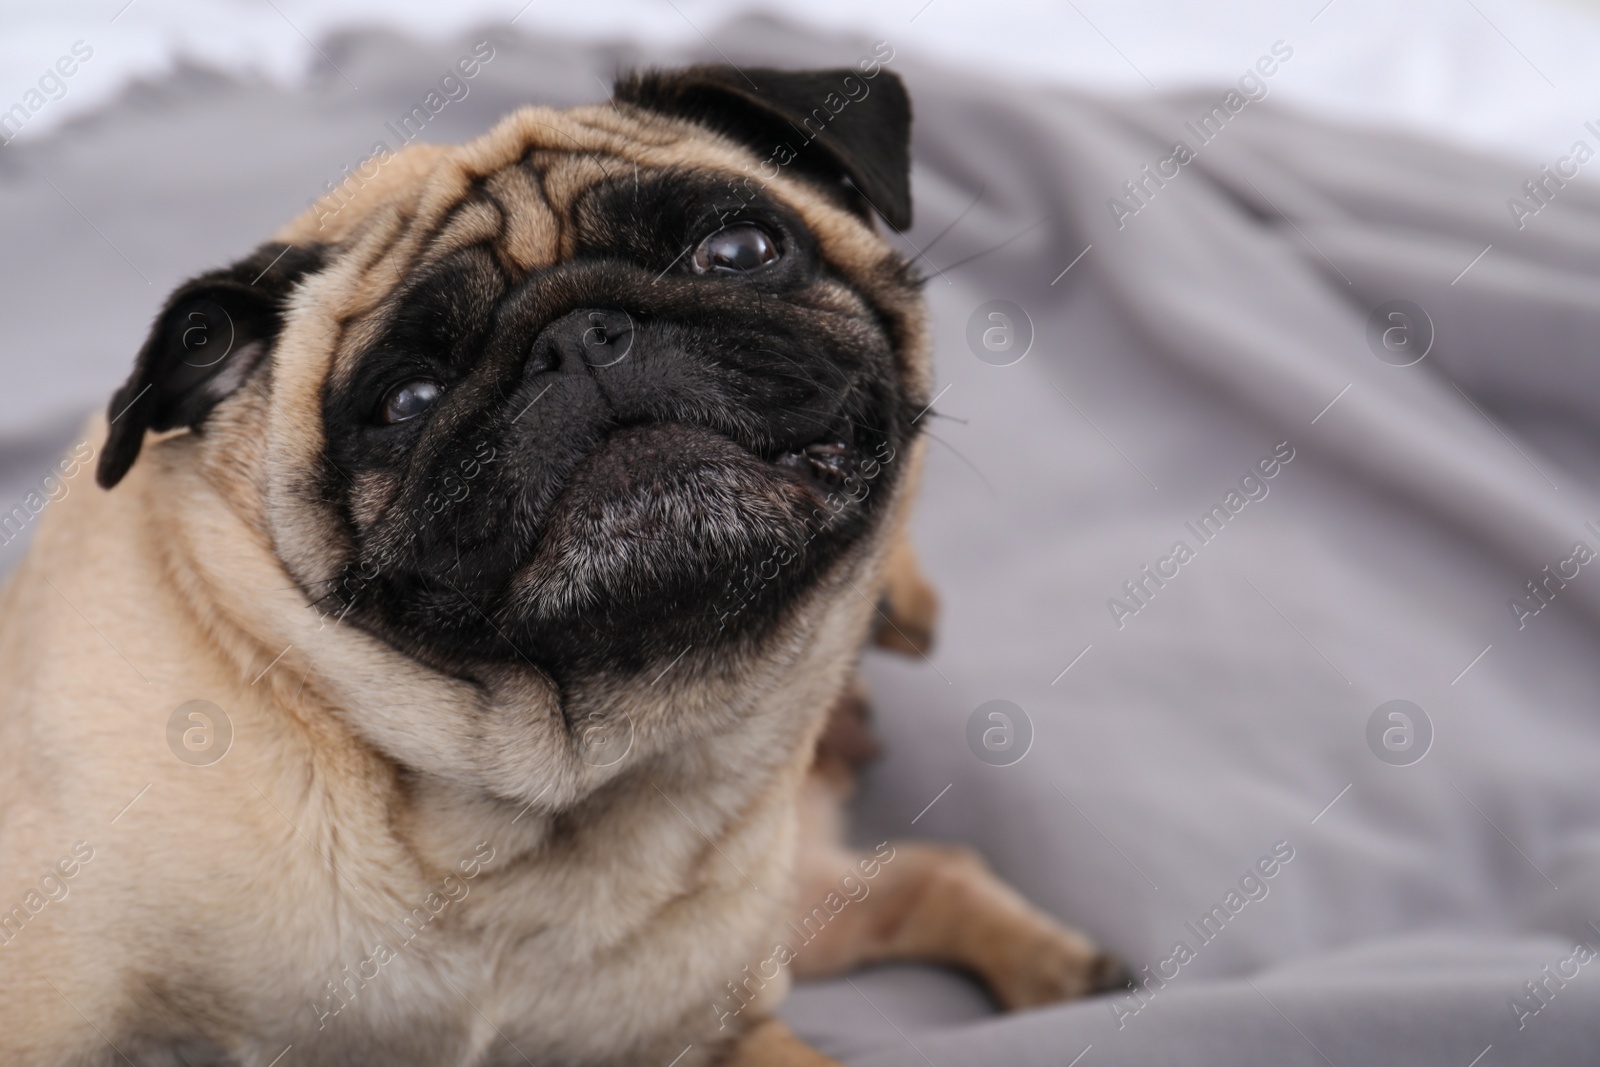 Photo of Happy cute pug dog on grey plaid at home